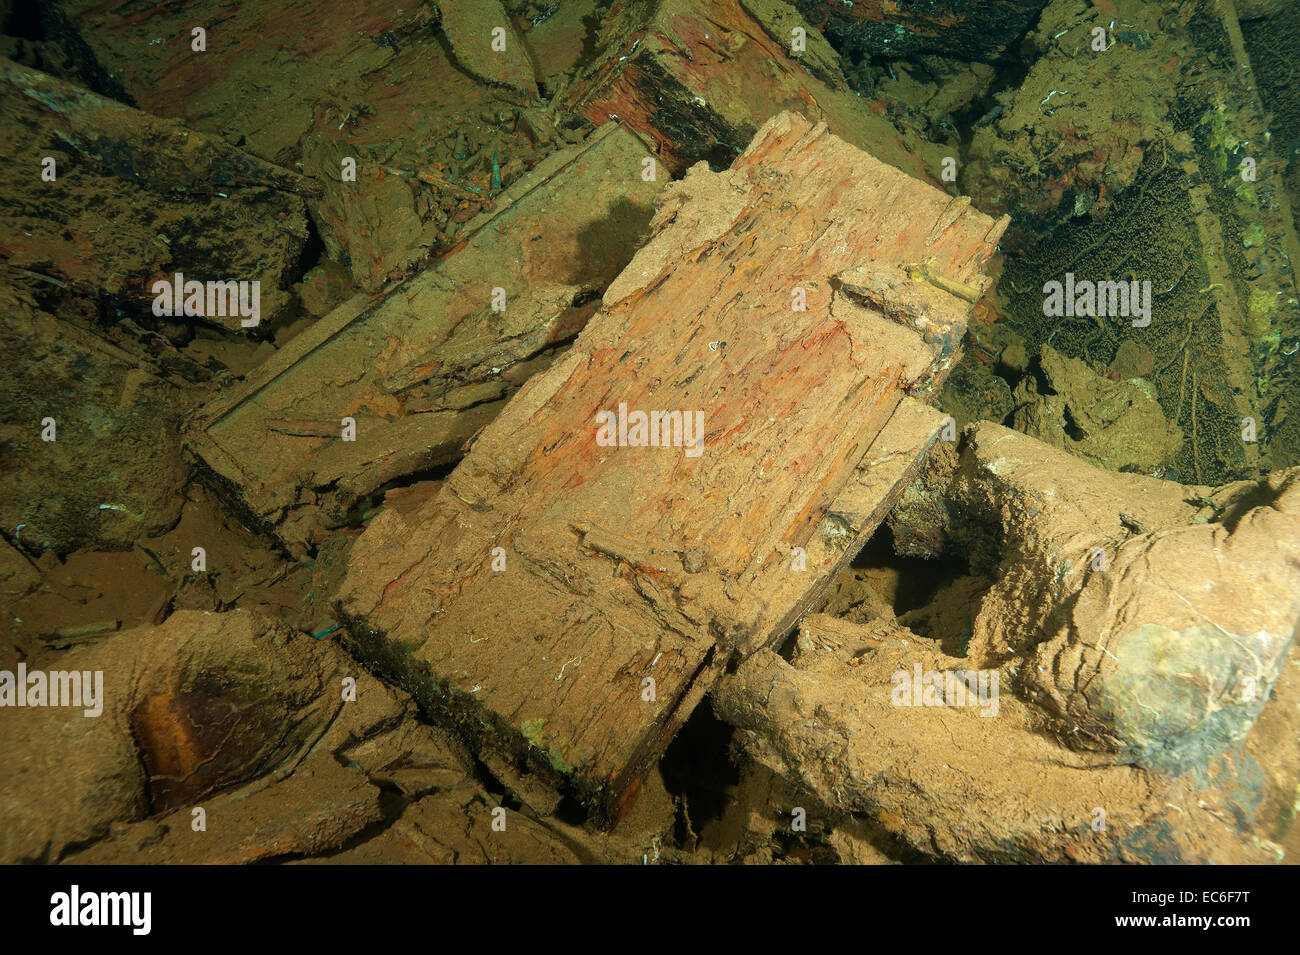 Ammunitions boxes inside the holds of the shipwreck Umbria sunk on Wingate reef in the Red Sea off Sudan coast Stock Photo